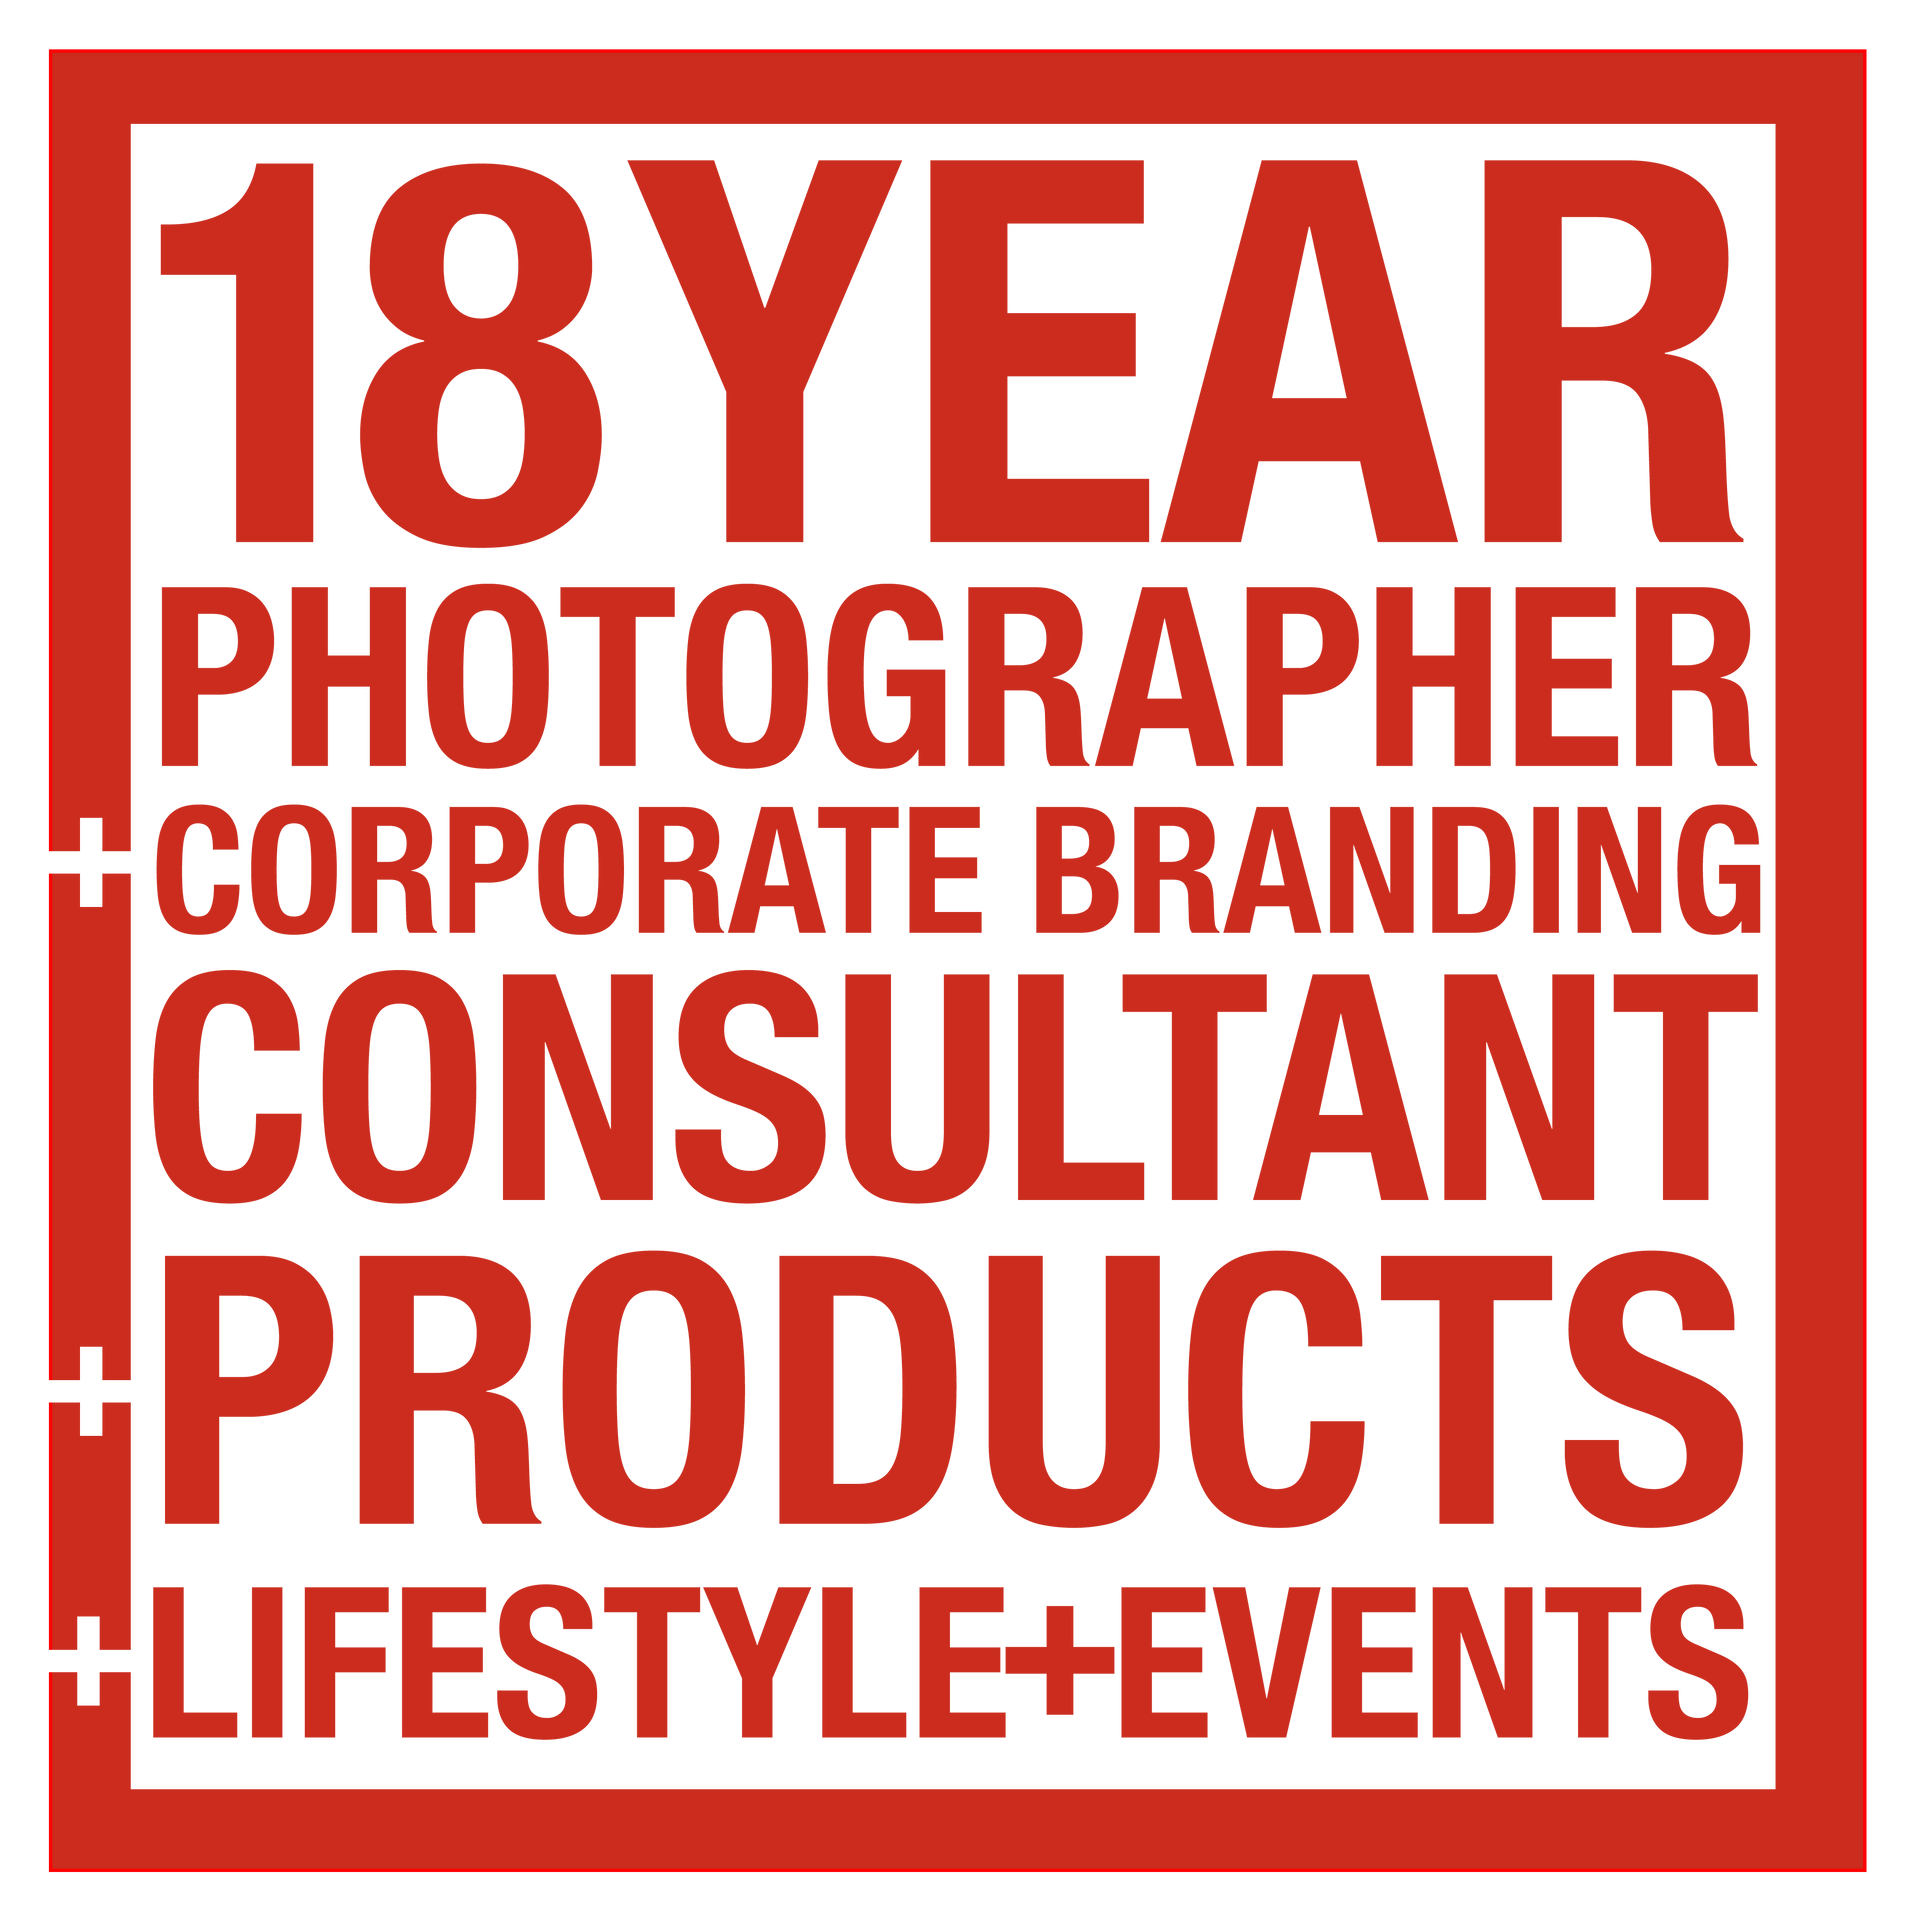 18 year photographer, corporate branding consultant, products, lifestyle and event photography